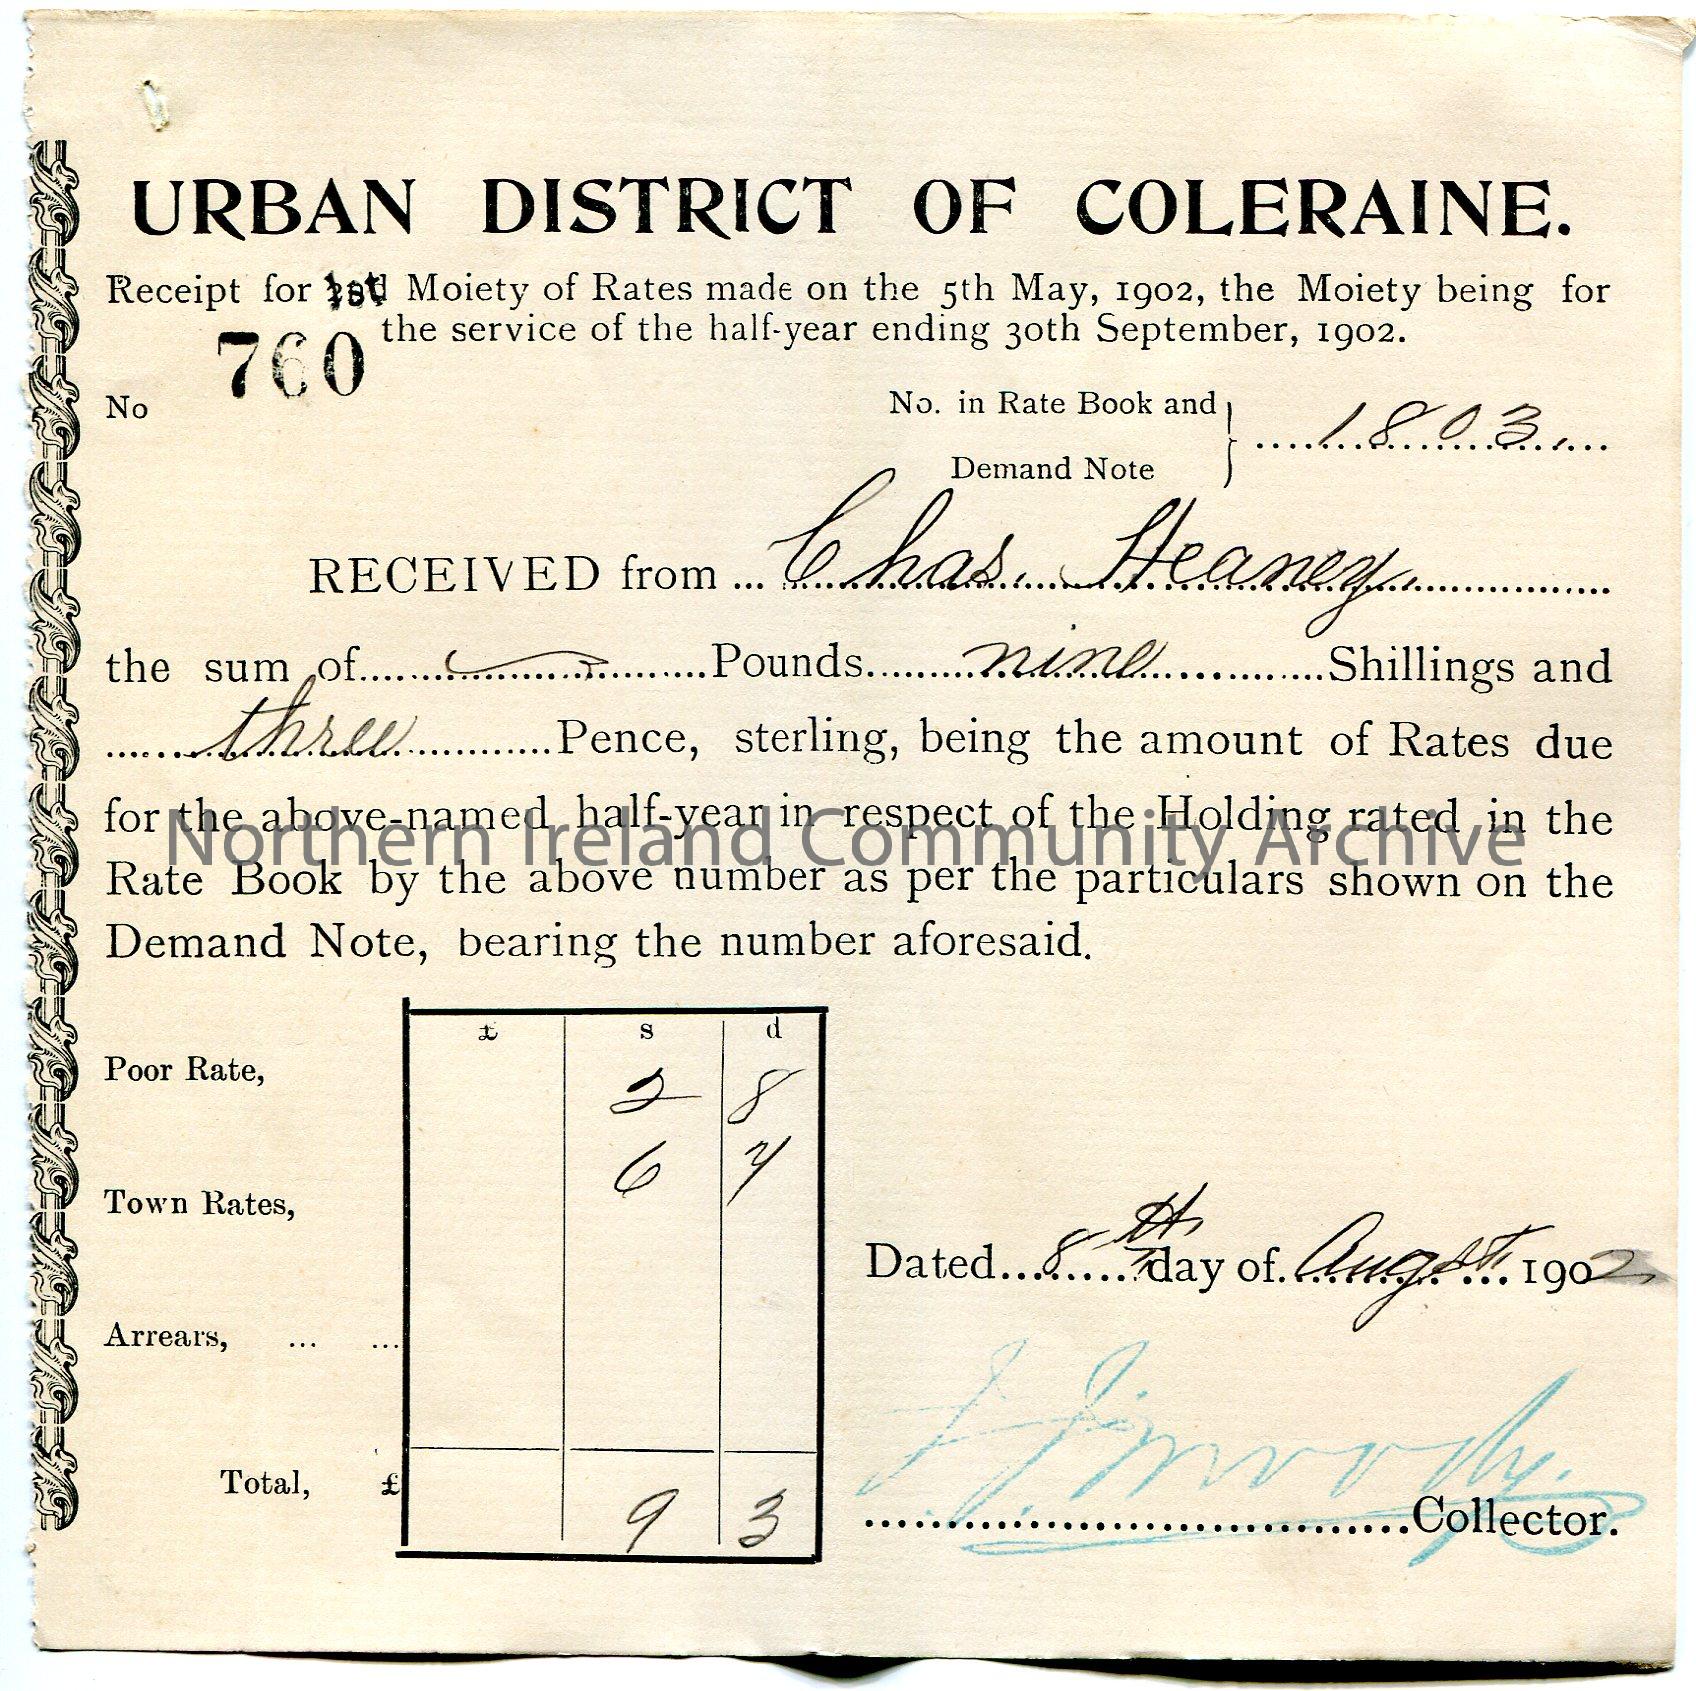 Printed and handwritten receipt for half year rates ending 30th September, 1902 for a property. Receipt no. 760. Issued by Urban District of Coleraine…